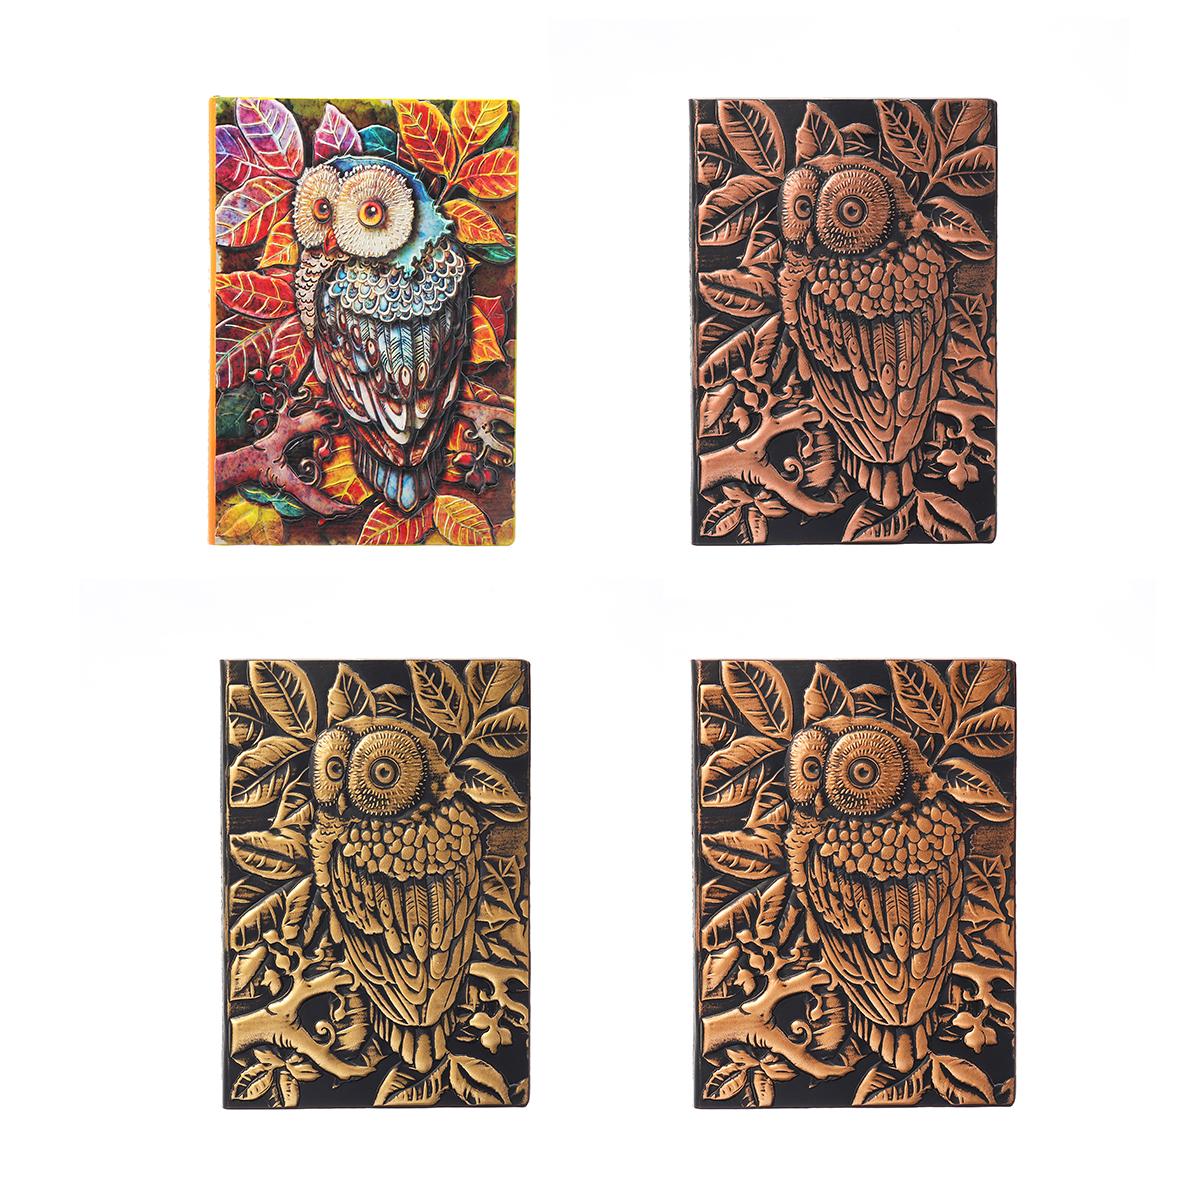 

Handmade Vintage 3D Embossed Owl Travel Diary Notebook Journal Leather Notepad